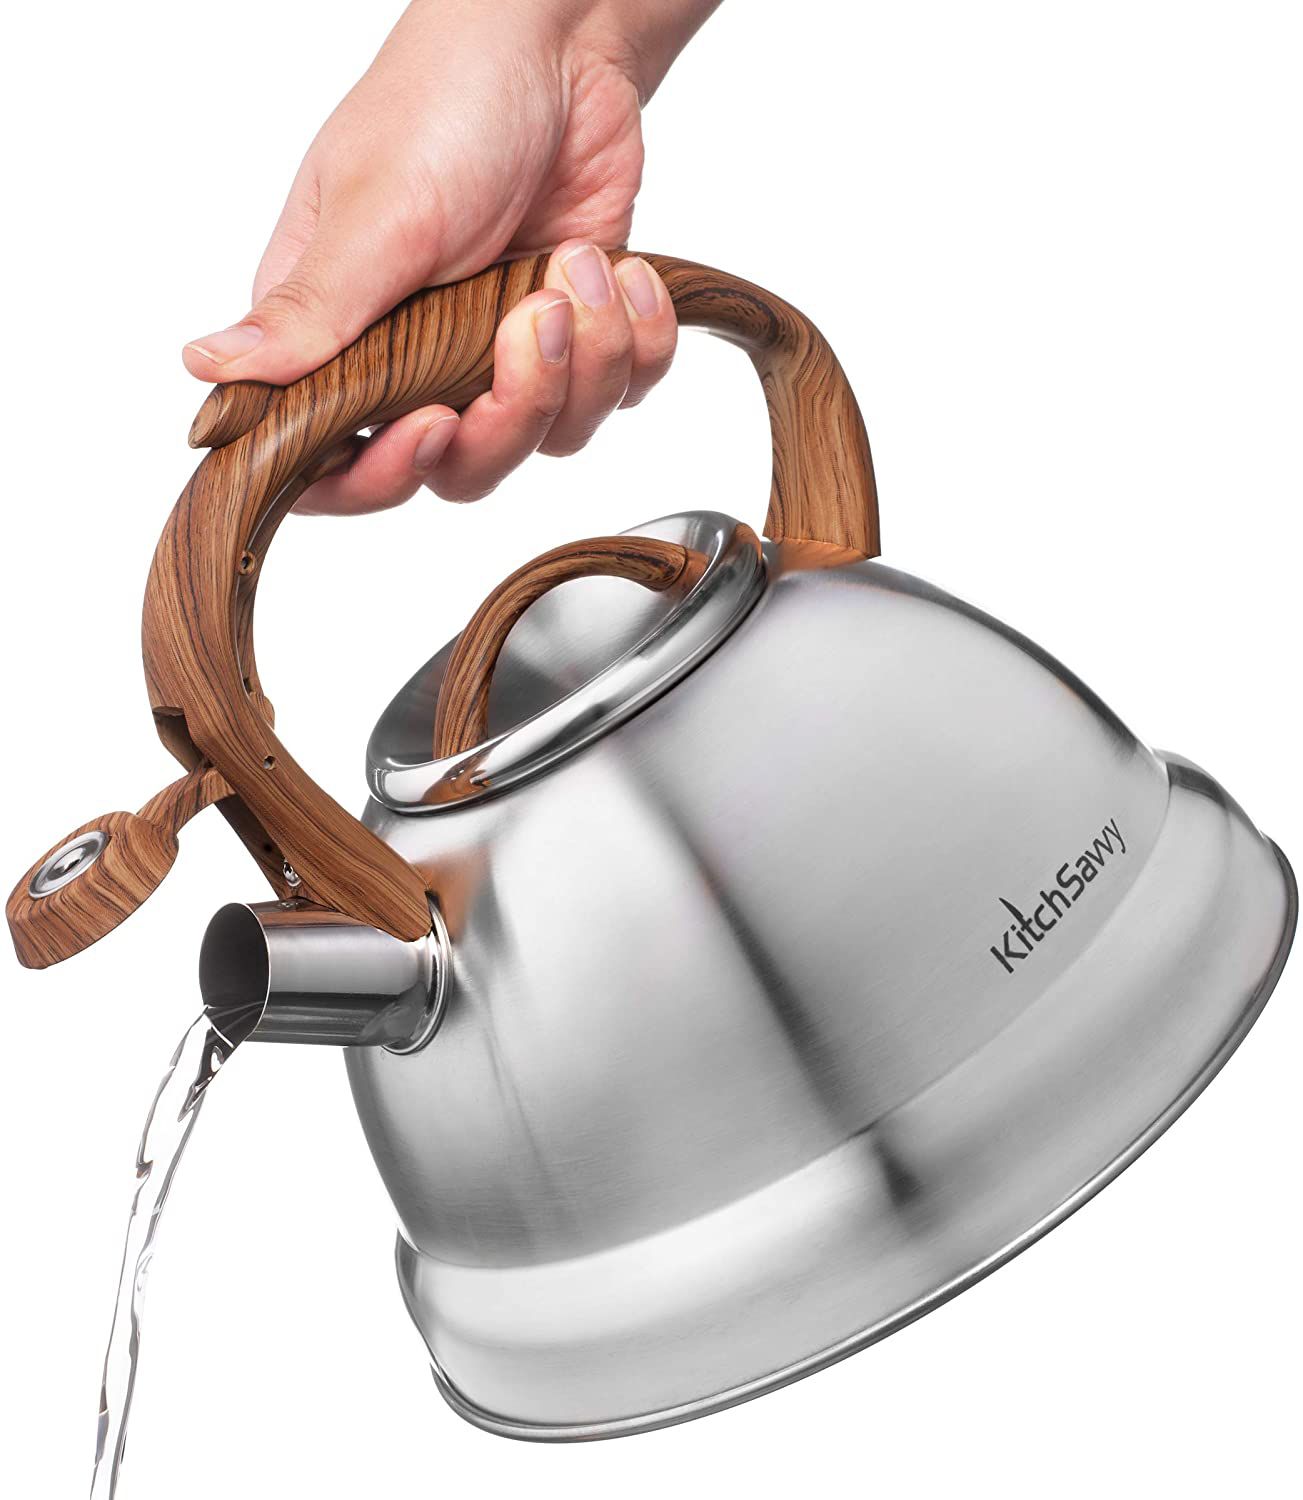 Tea Kettle For Stove Top – Stainless Steel Tea Kettle Stovetop - Whistling Tea Kettle With Stay Cool Handle